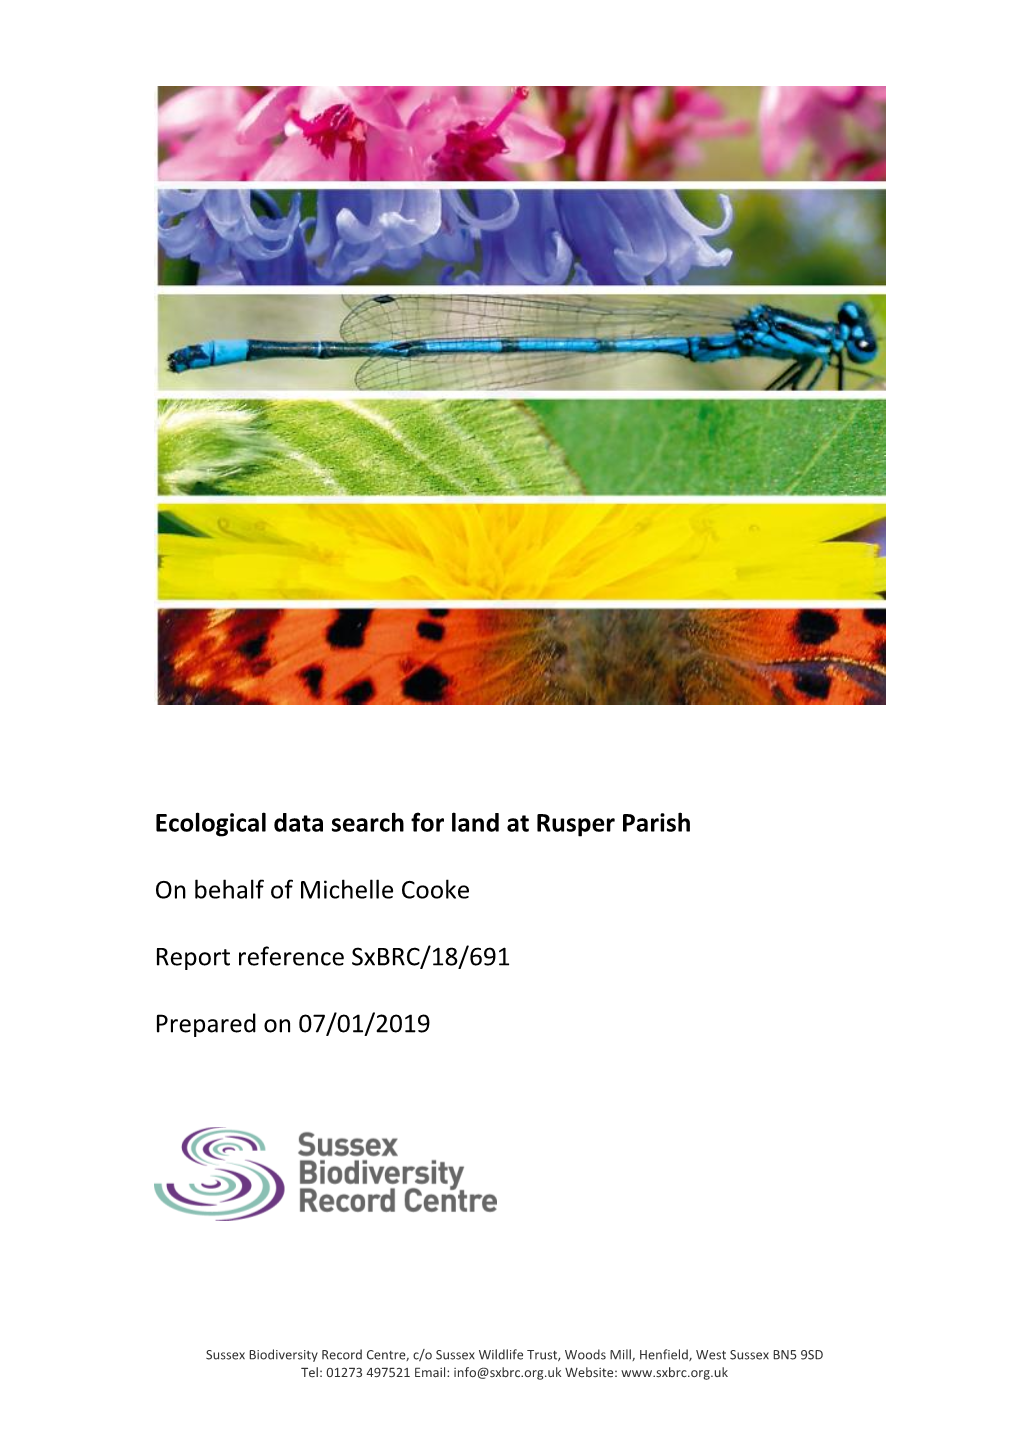 Sussex Biodiversity Record Centre Ecological Data Search for Sharing